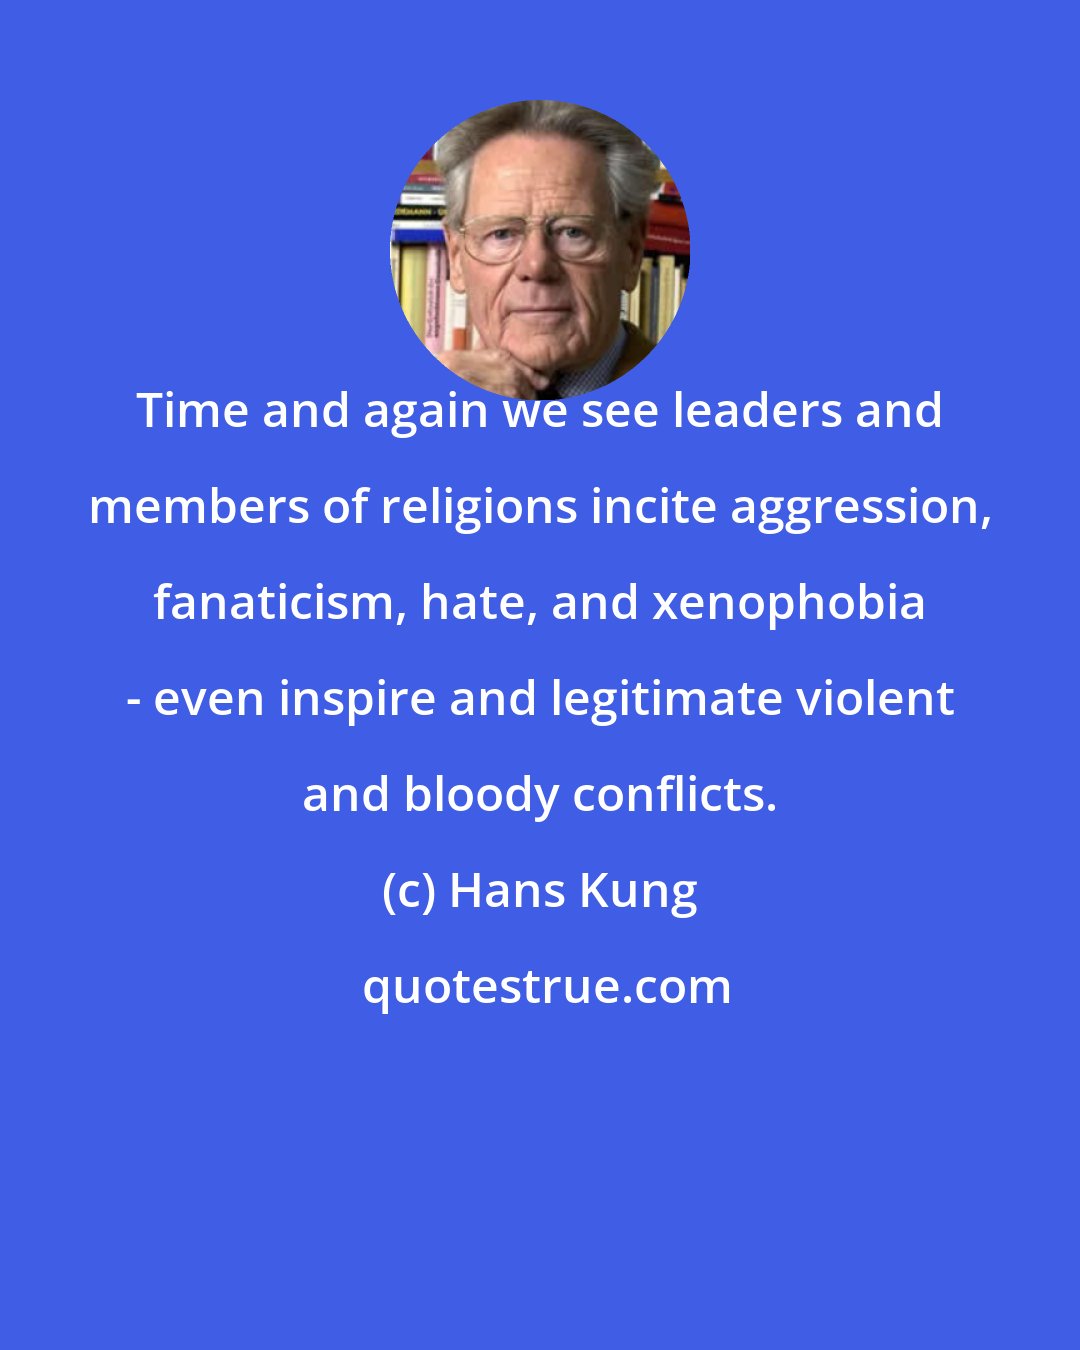 Hans Kung: Time and again we see leaders and members of religions incite aggression, fanaticism, hate, and xenophobia - even inspire and legitimate violent and bloody conflicts.